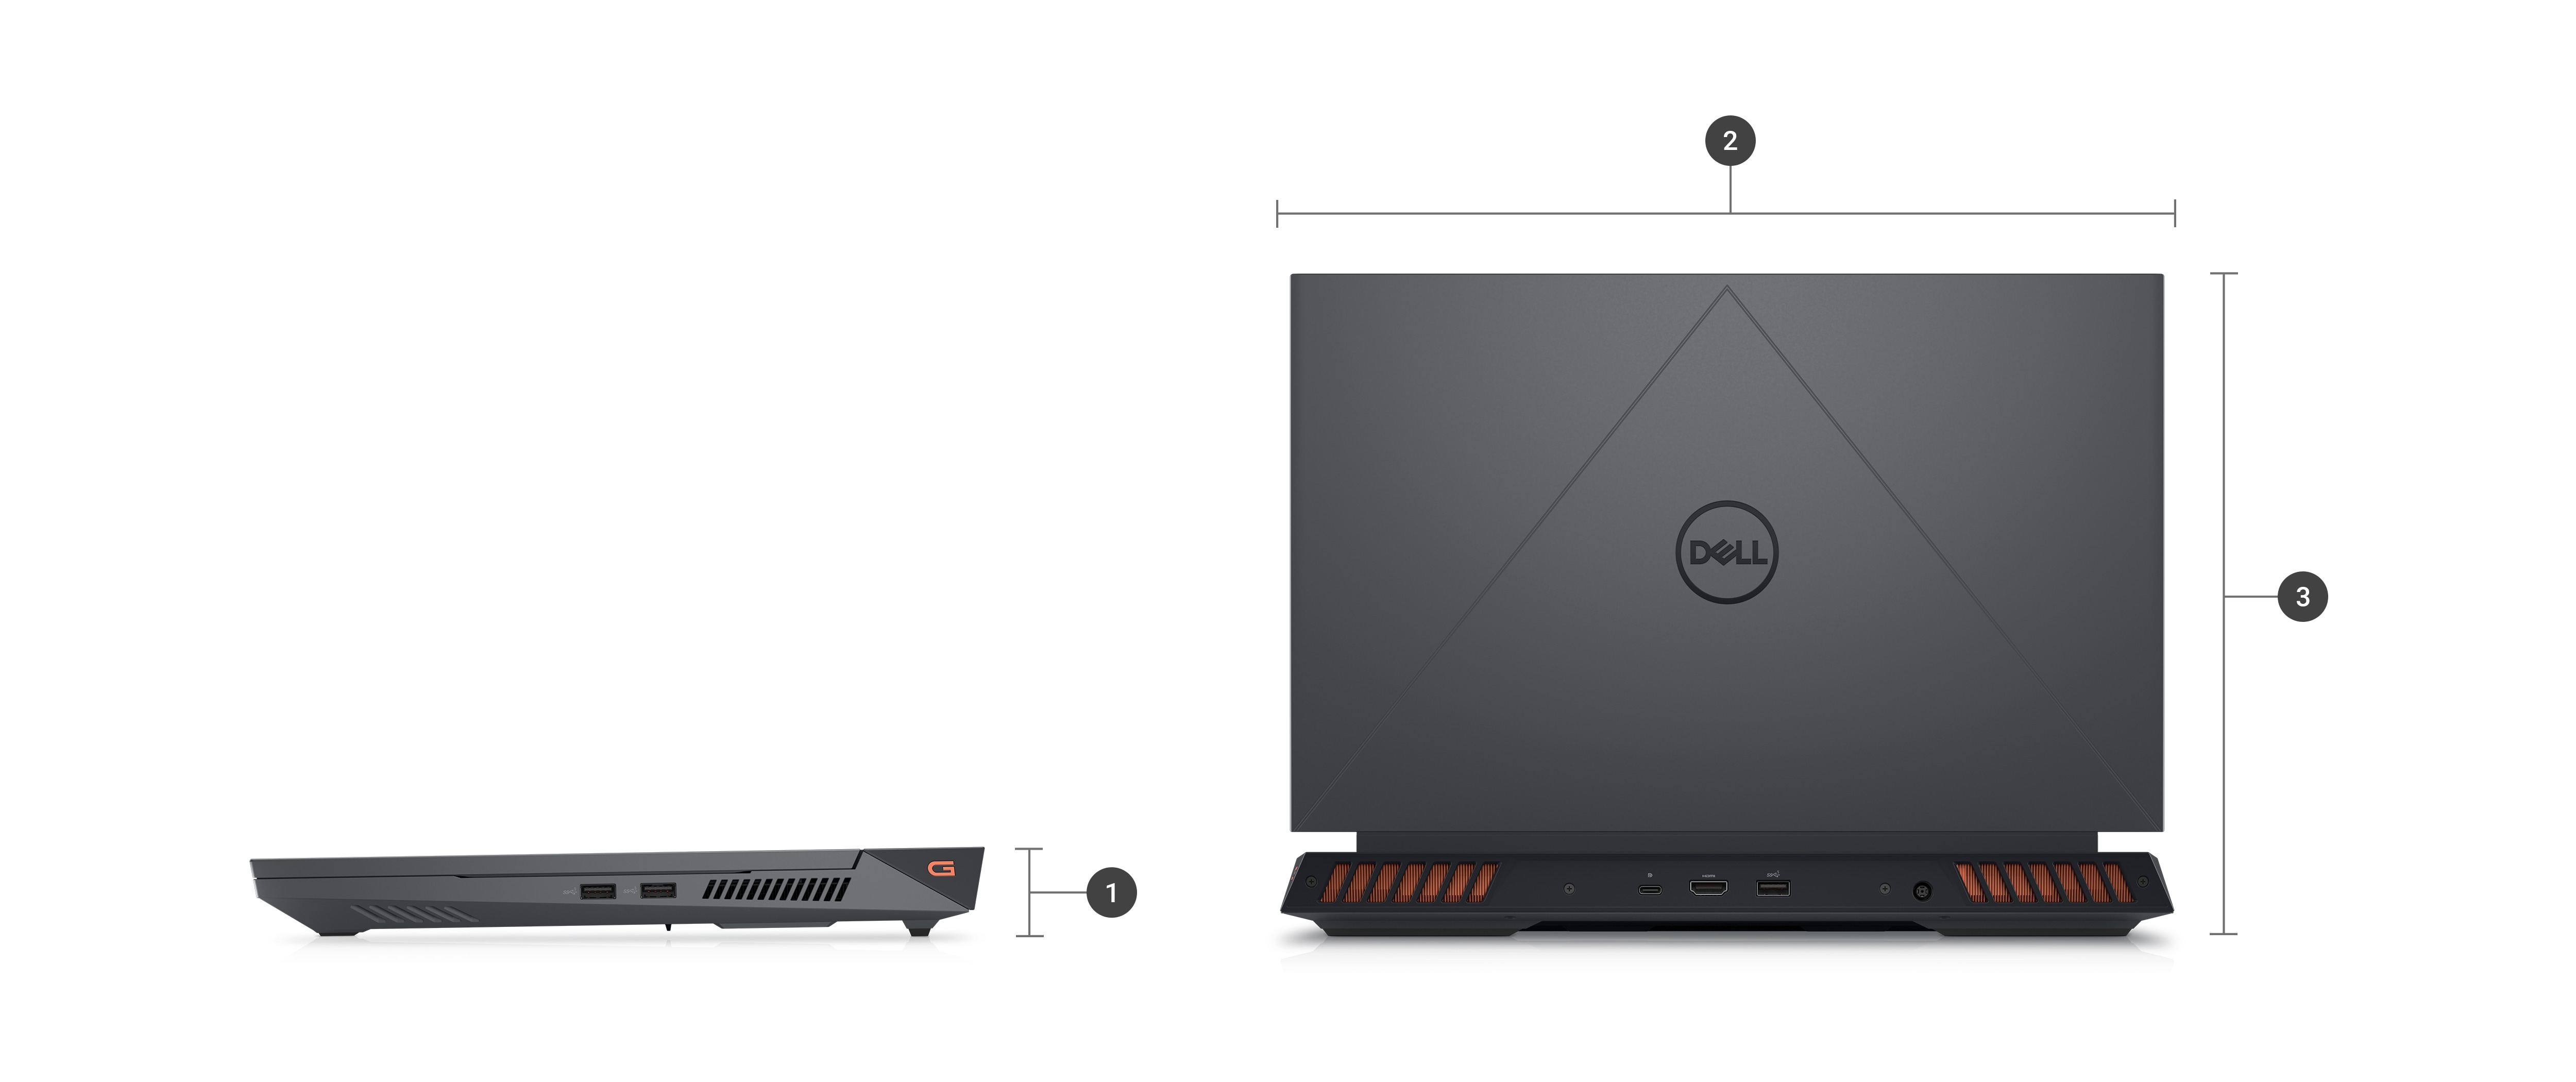 Dell G Series 15 5535 Gaming Laptop with numbers from 1 to 3 showing the product dimensions and weight.